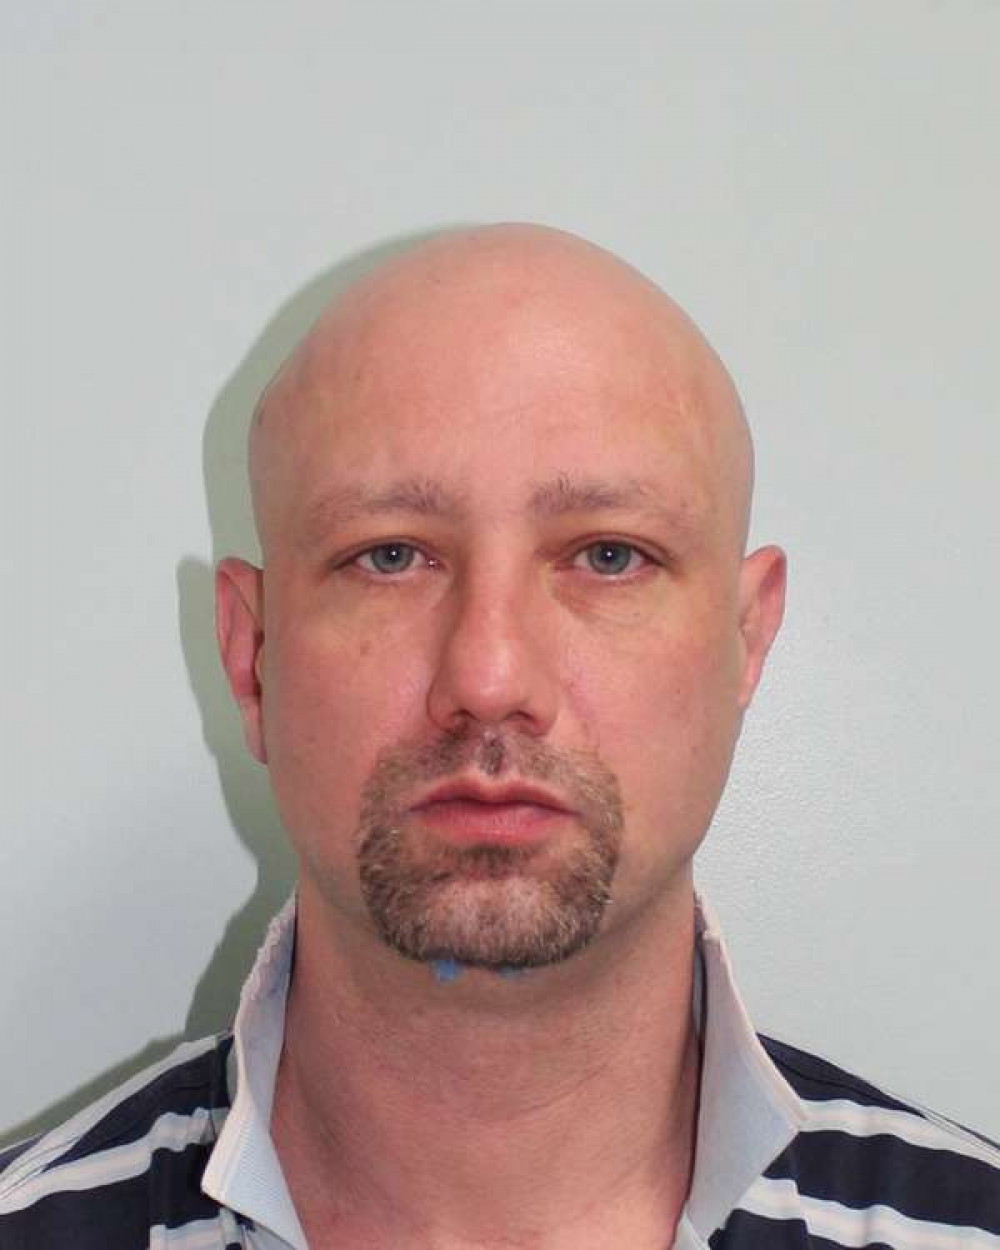 Christopher Malone, aged 44,  was found guilty at Kingston Crown for threats to kill and actual bodily harm against his then partner.